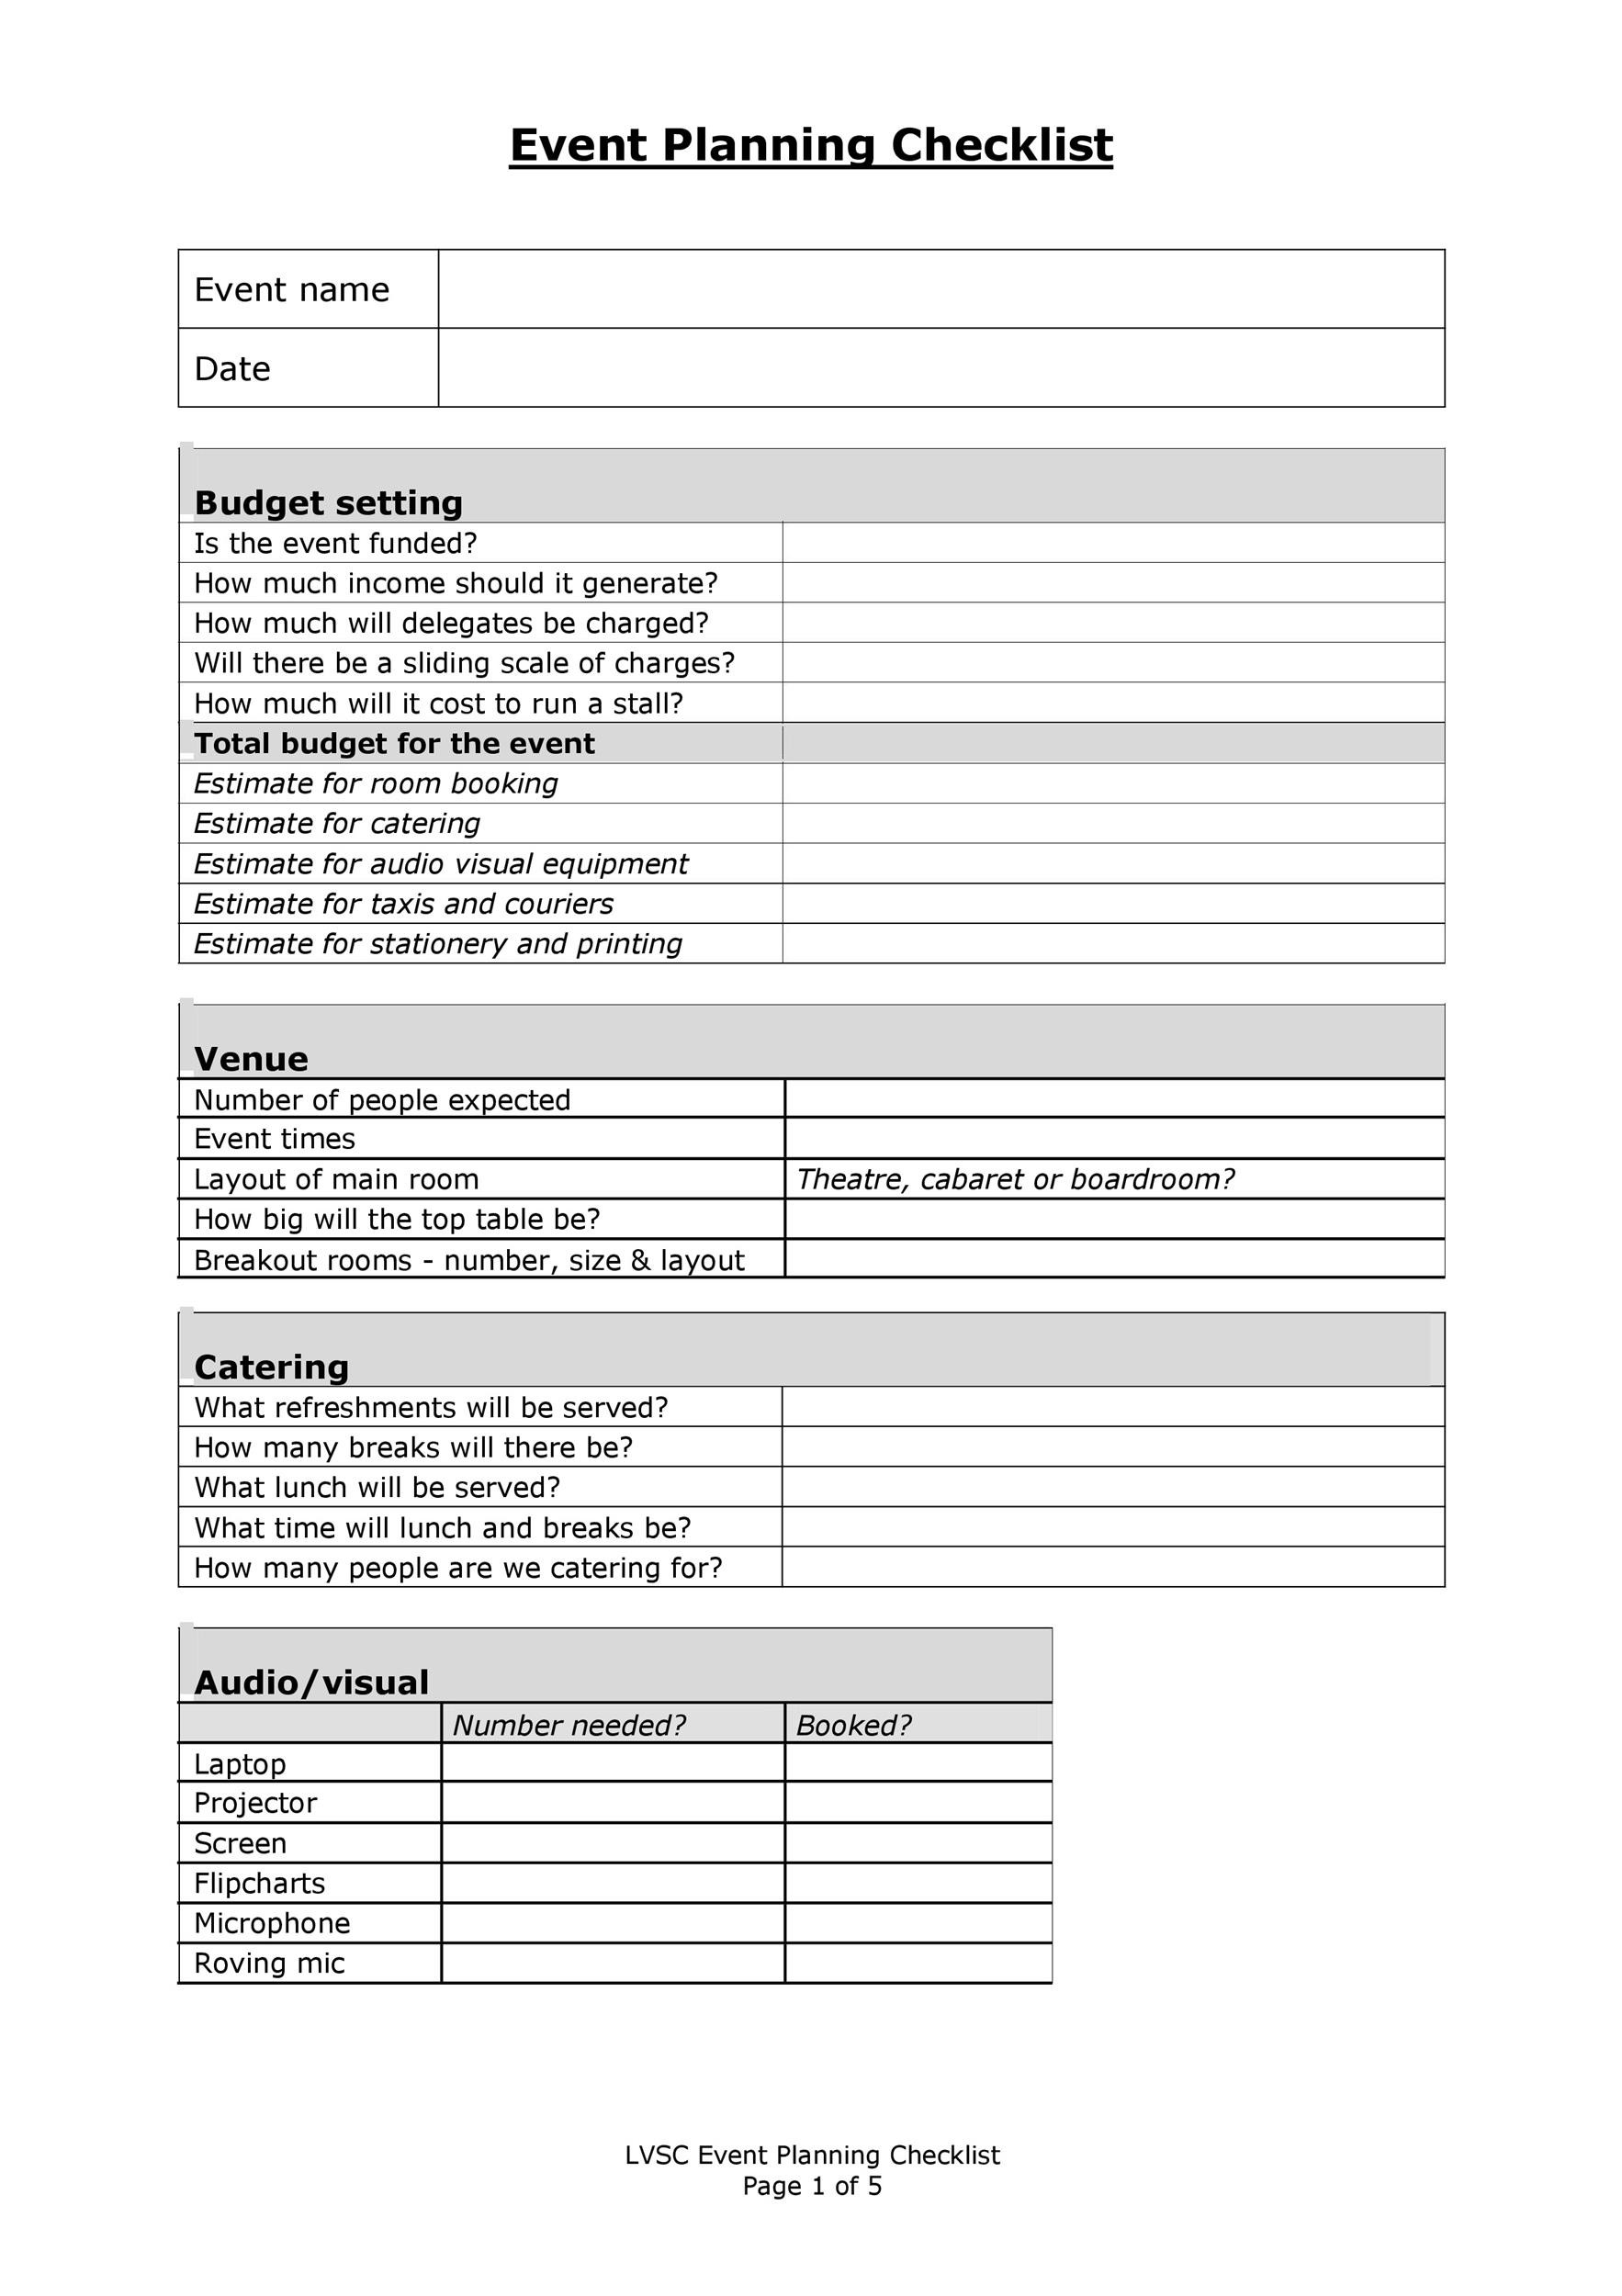 corporate-event-checklist-template-tutore-org-master-of-documents